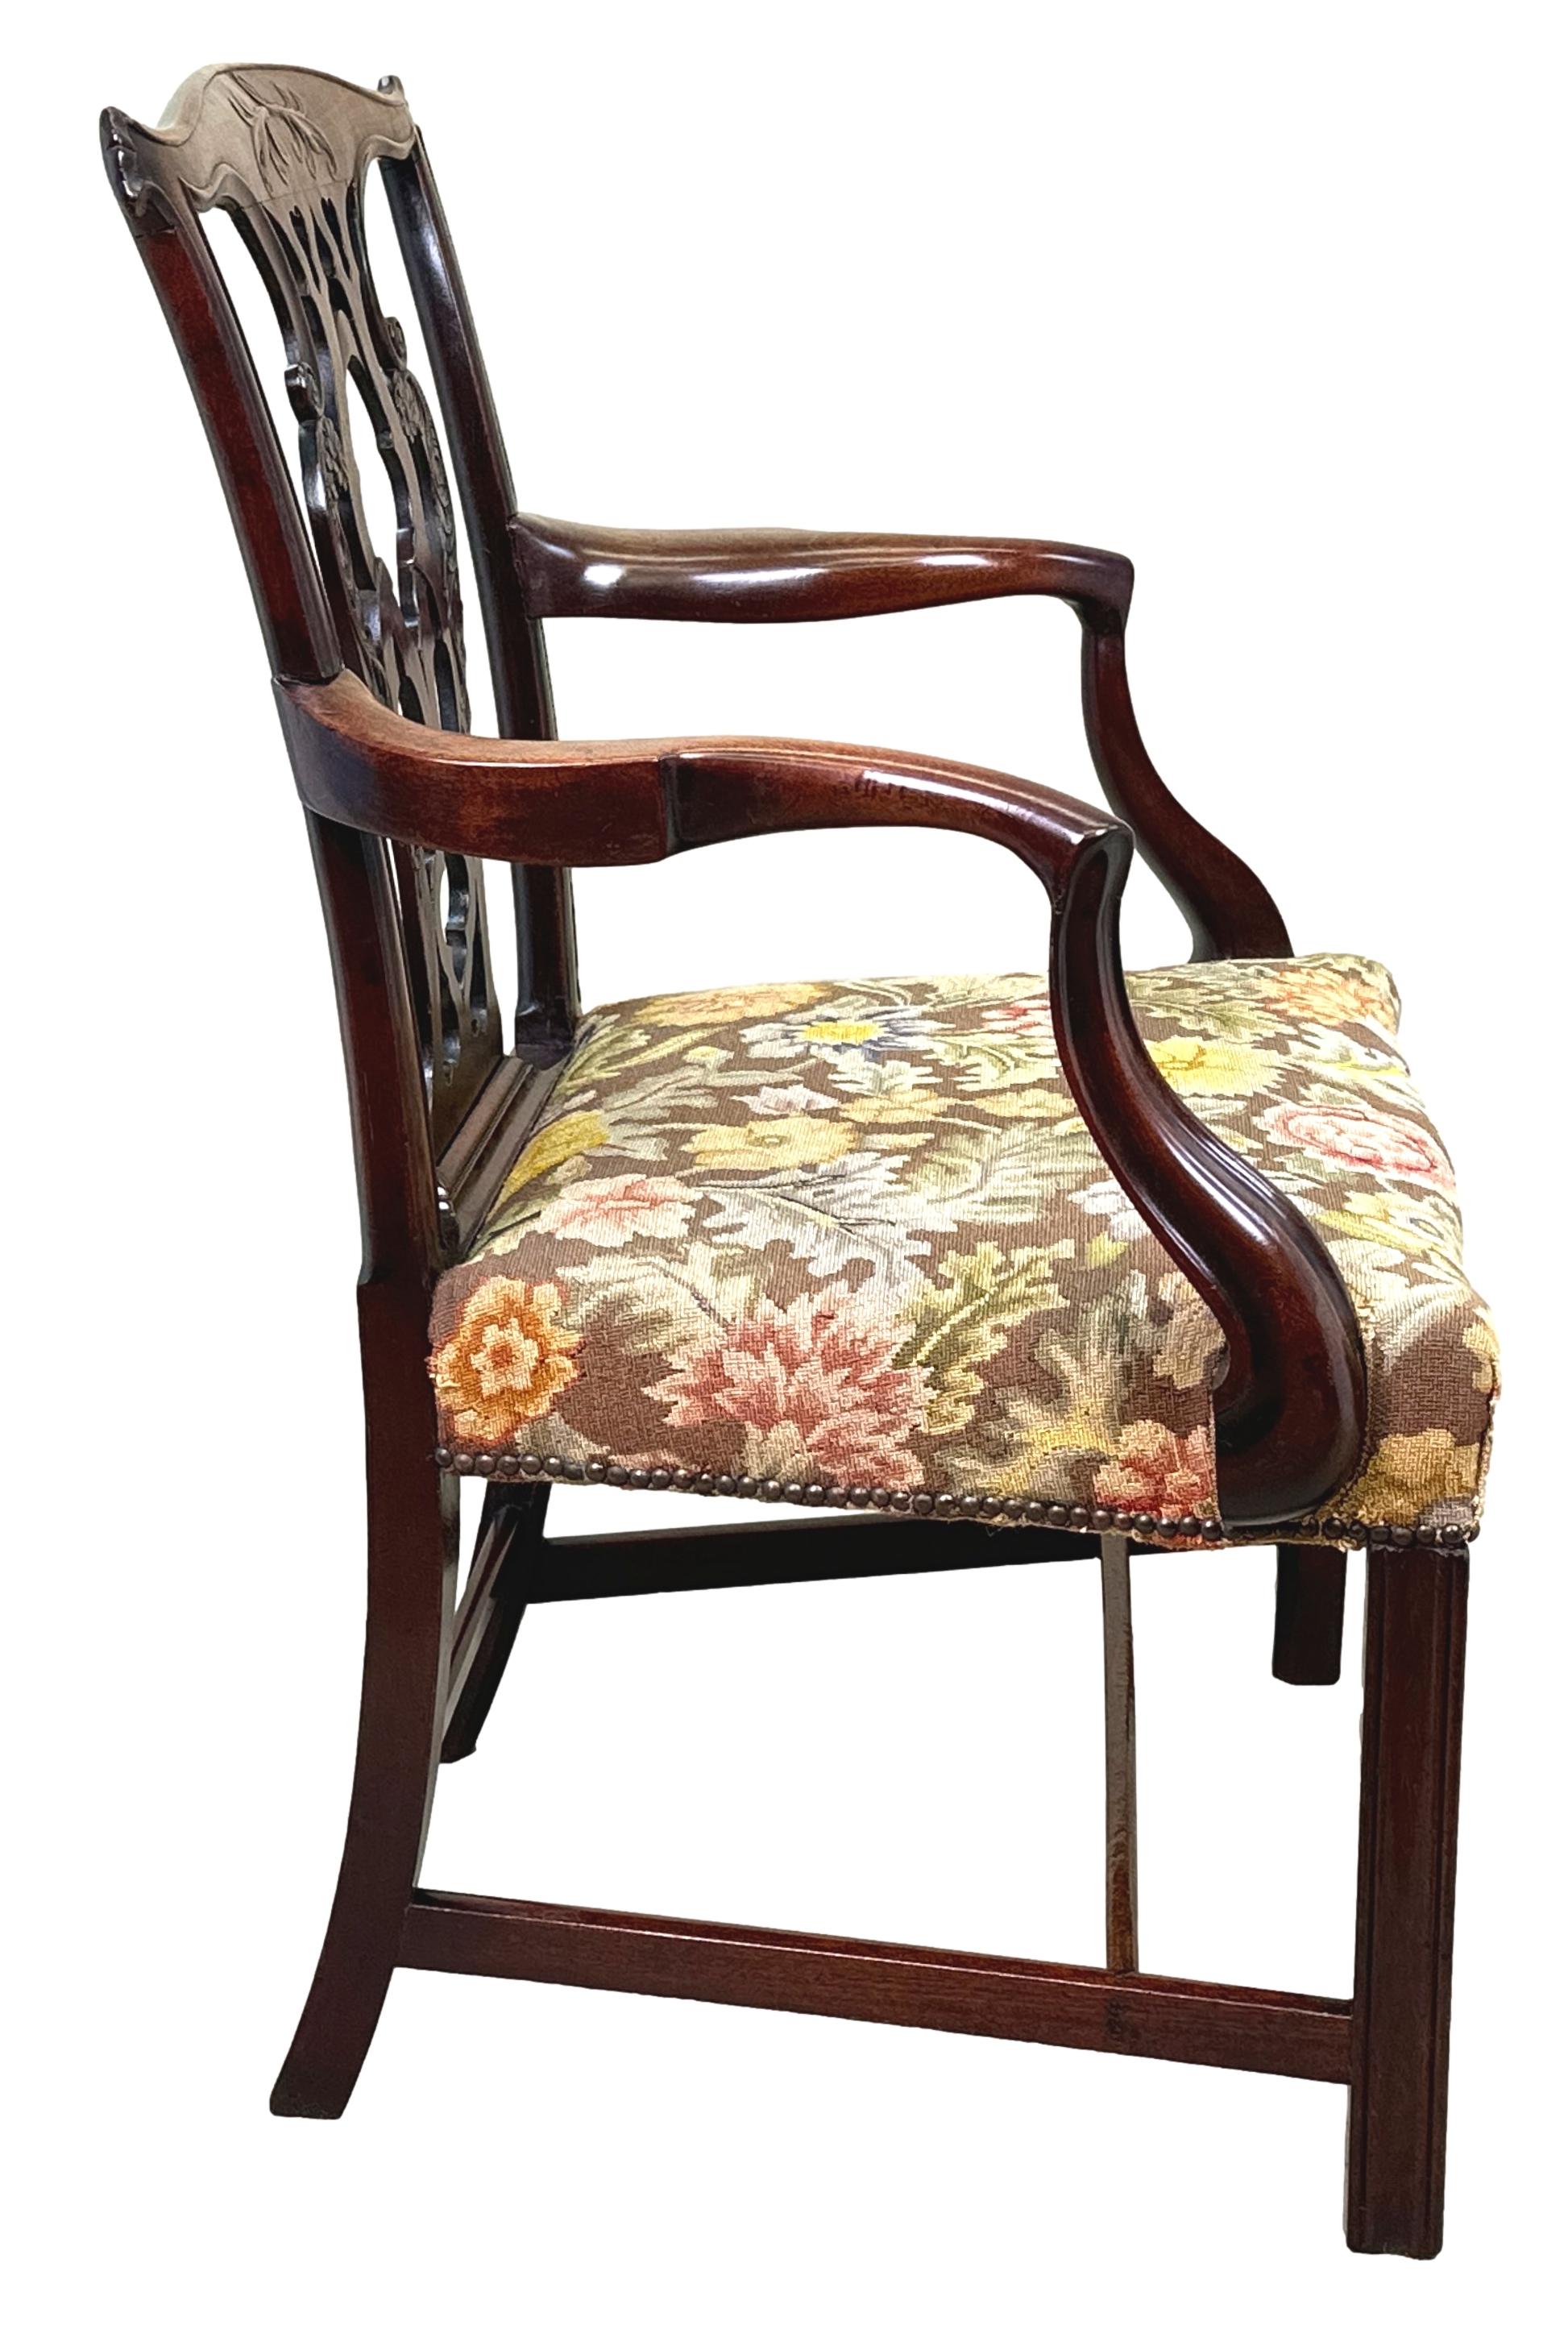 Chippendale 18th Century Mahogany Carver Armchair In Good Condition For Sale In Bedfordshire, GB